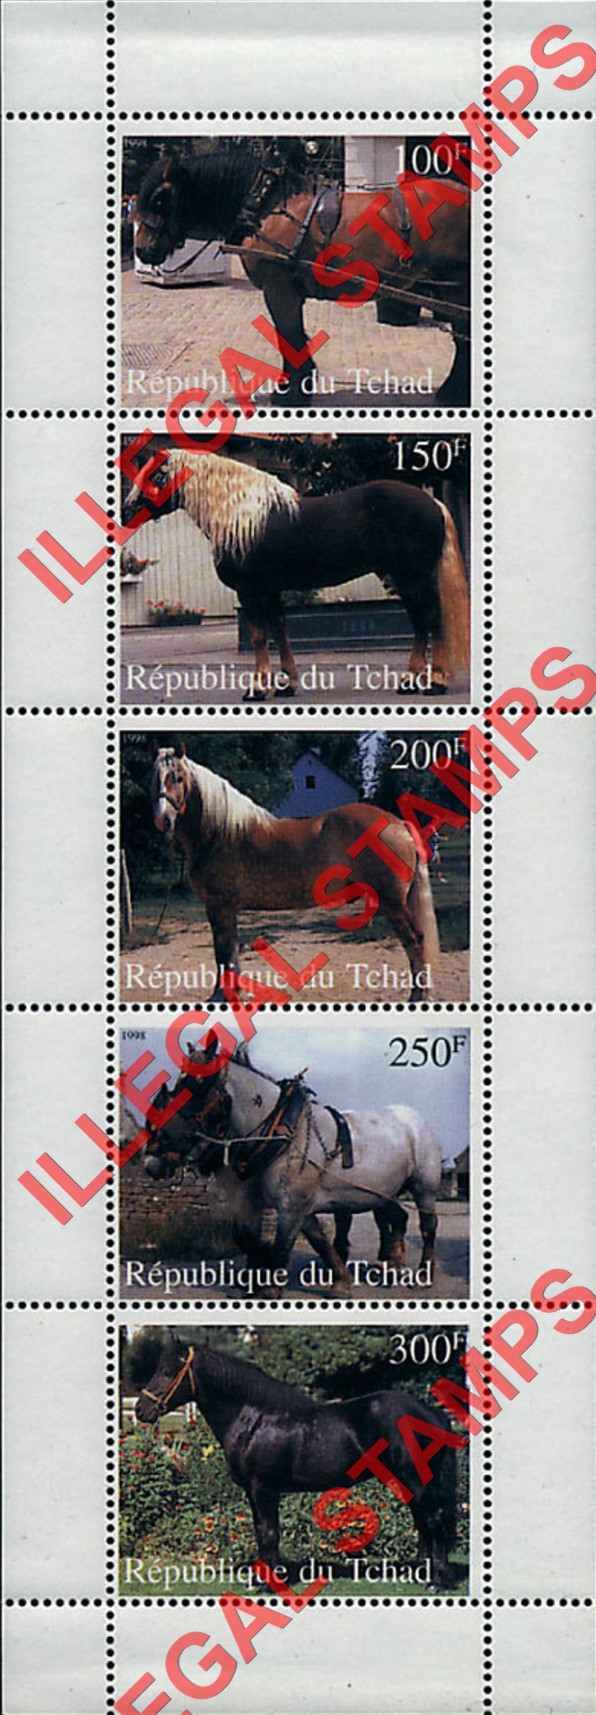 Chad 1998 Horses Illegal Stamps in Strip of 5